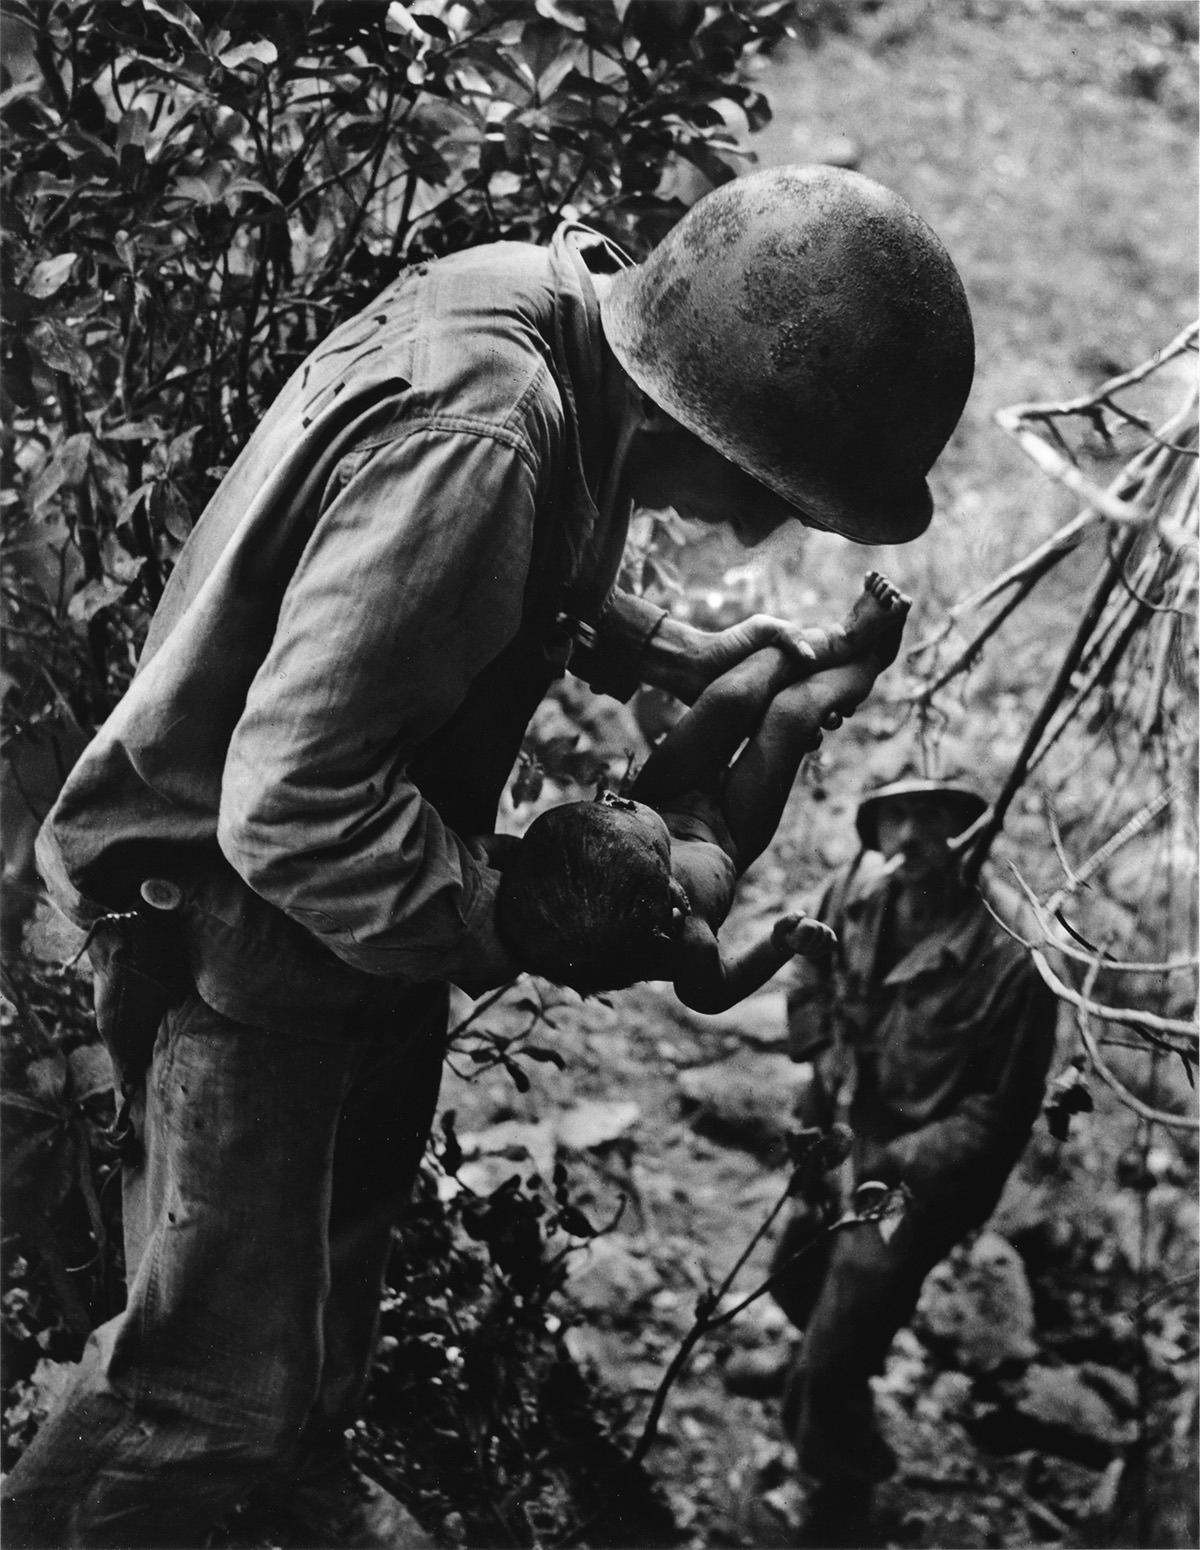 W. EUGENE SMITH (1918-1978) Saipan (soldier with an infant).